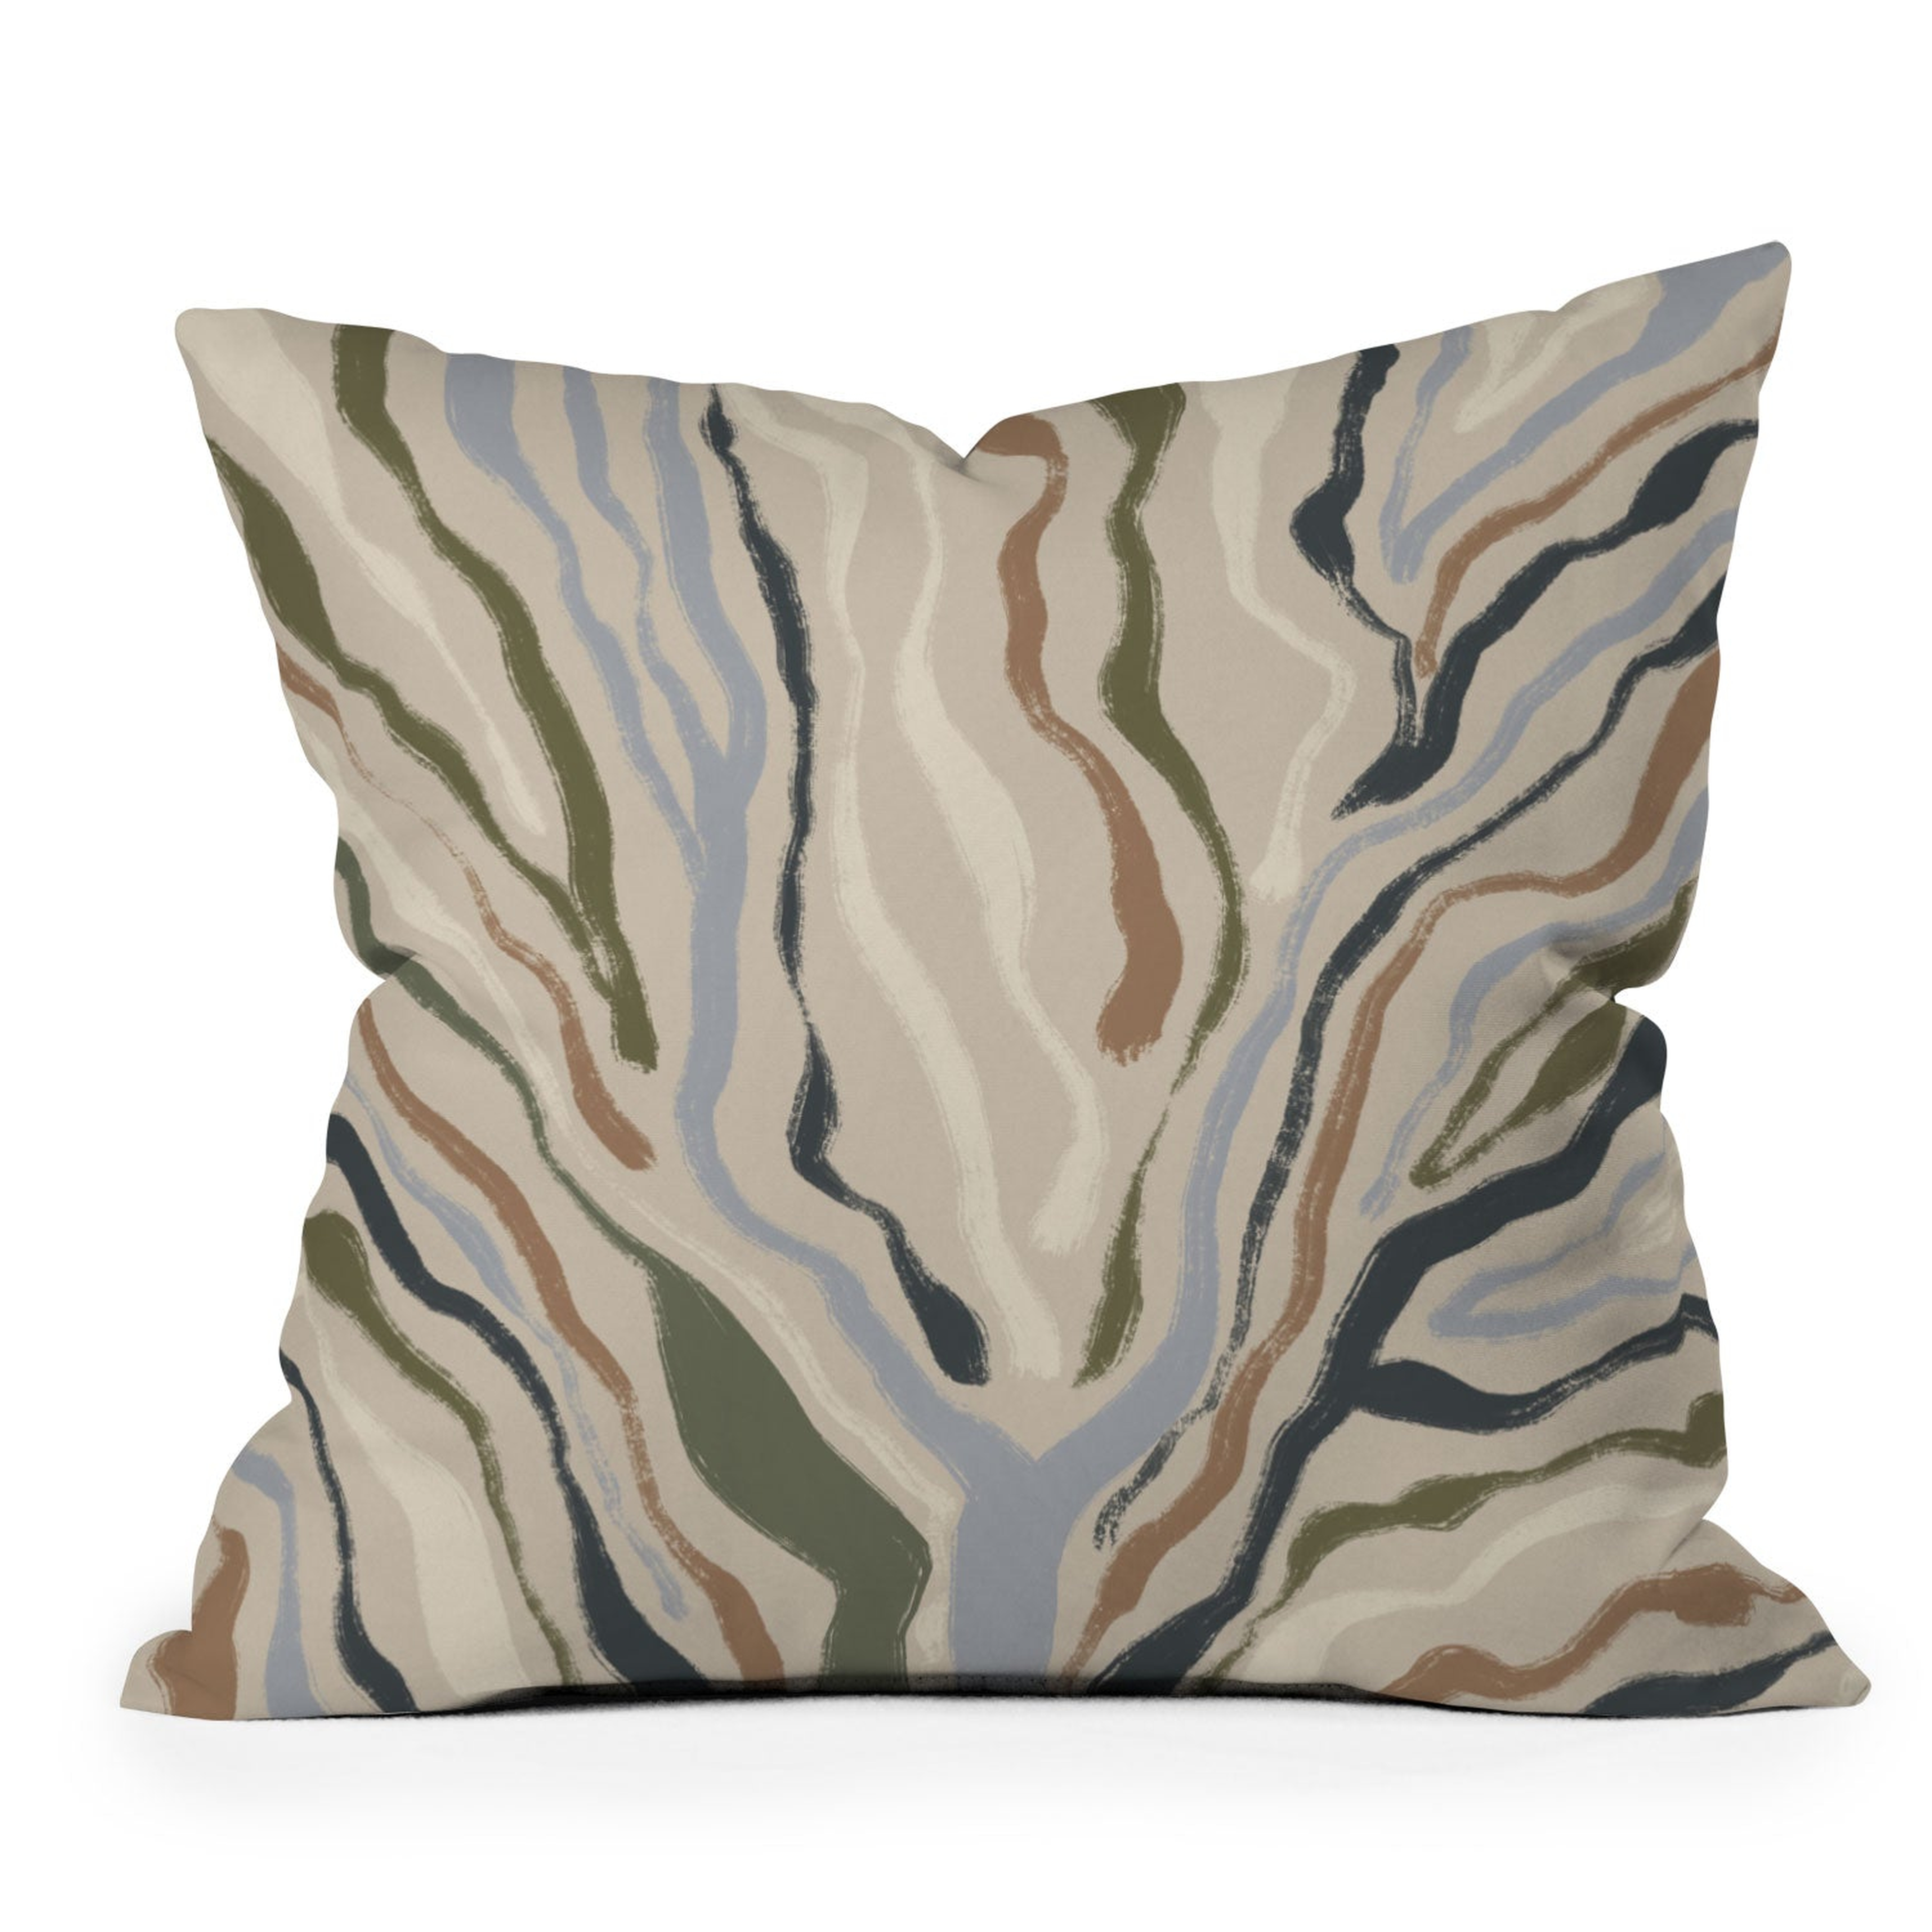 RIVERS TOPOGRAPHIC MAP  BY ALISA GALITSYNA- Outdoor Throw Pillow 20" x 20" - Wander Print Co.